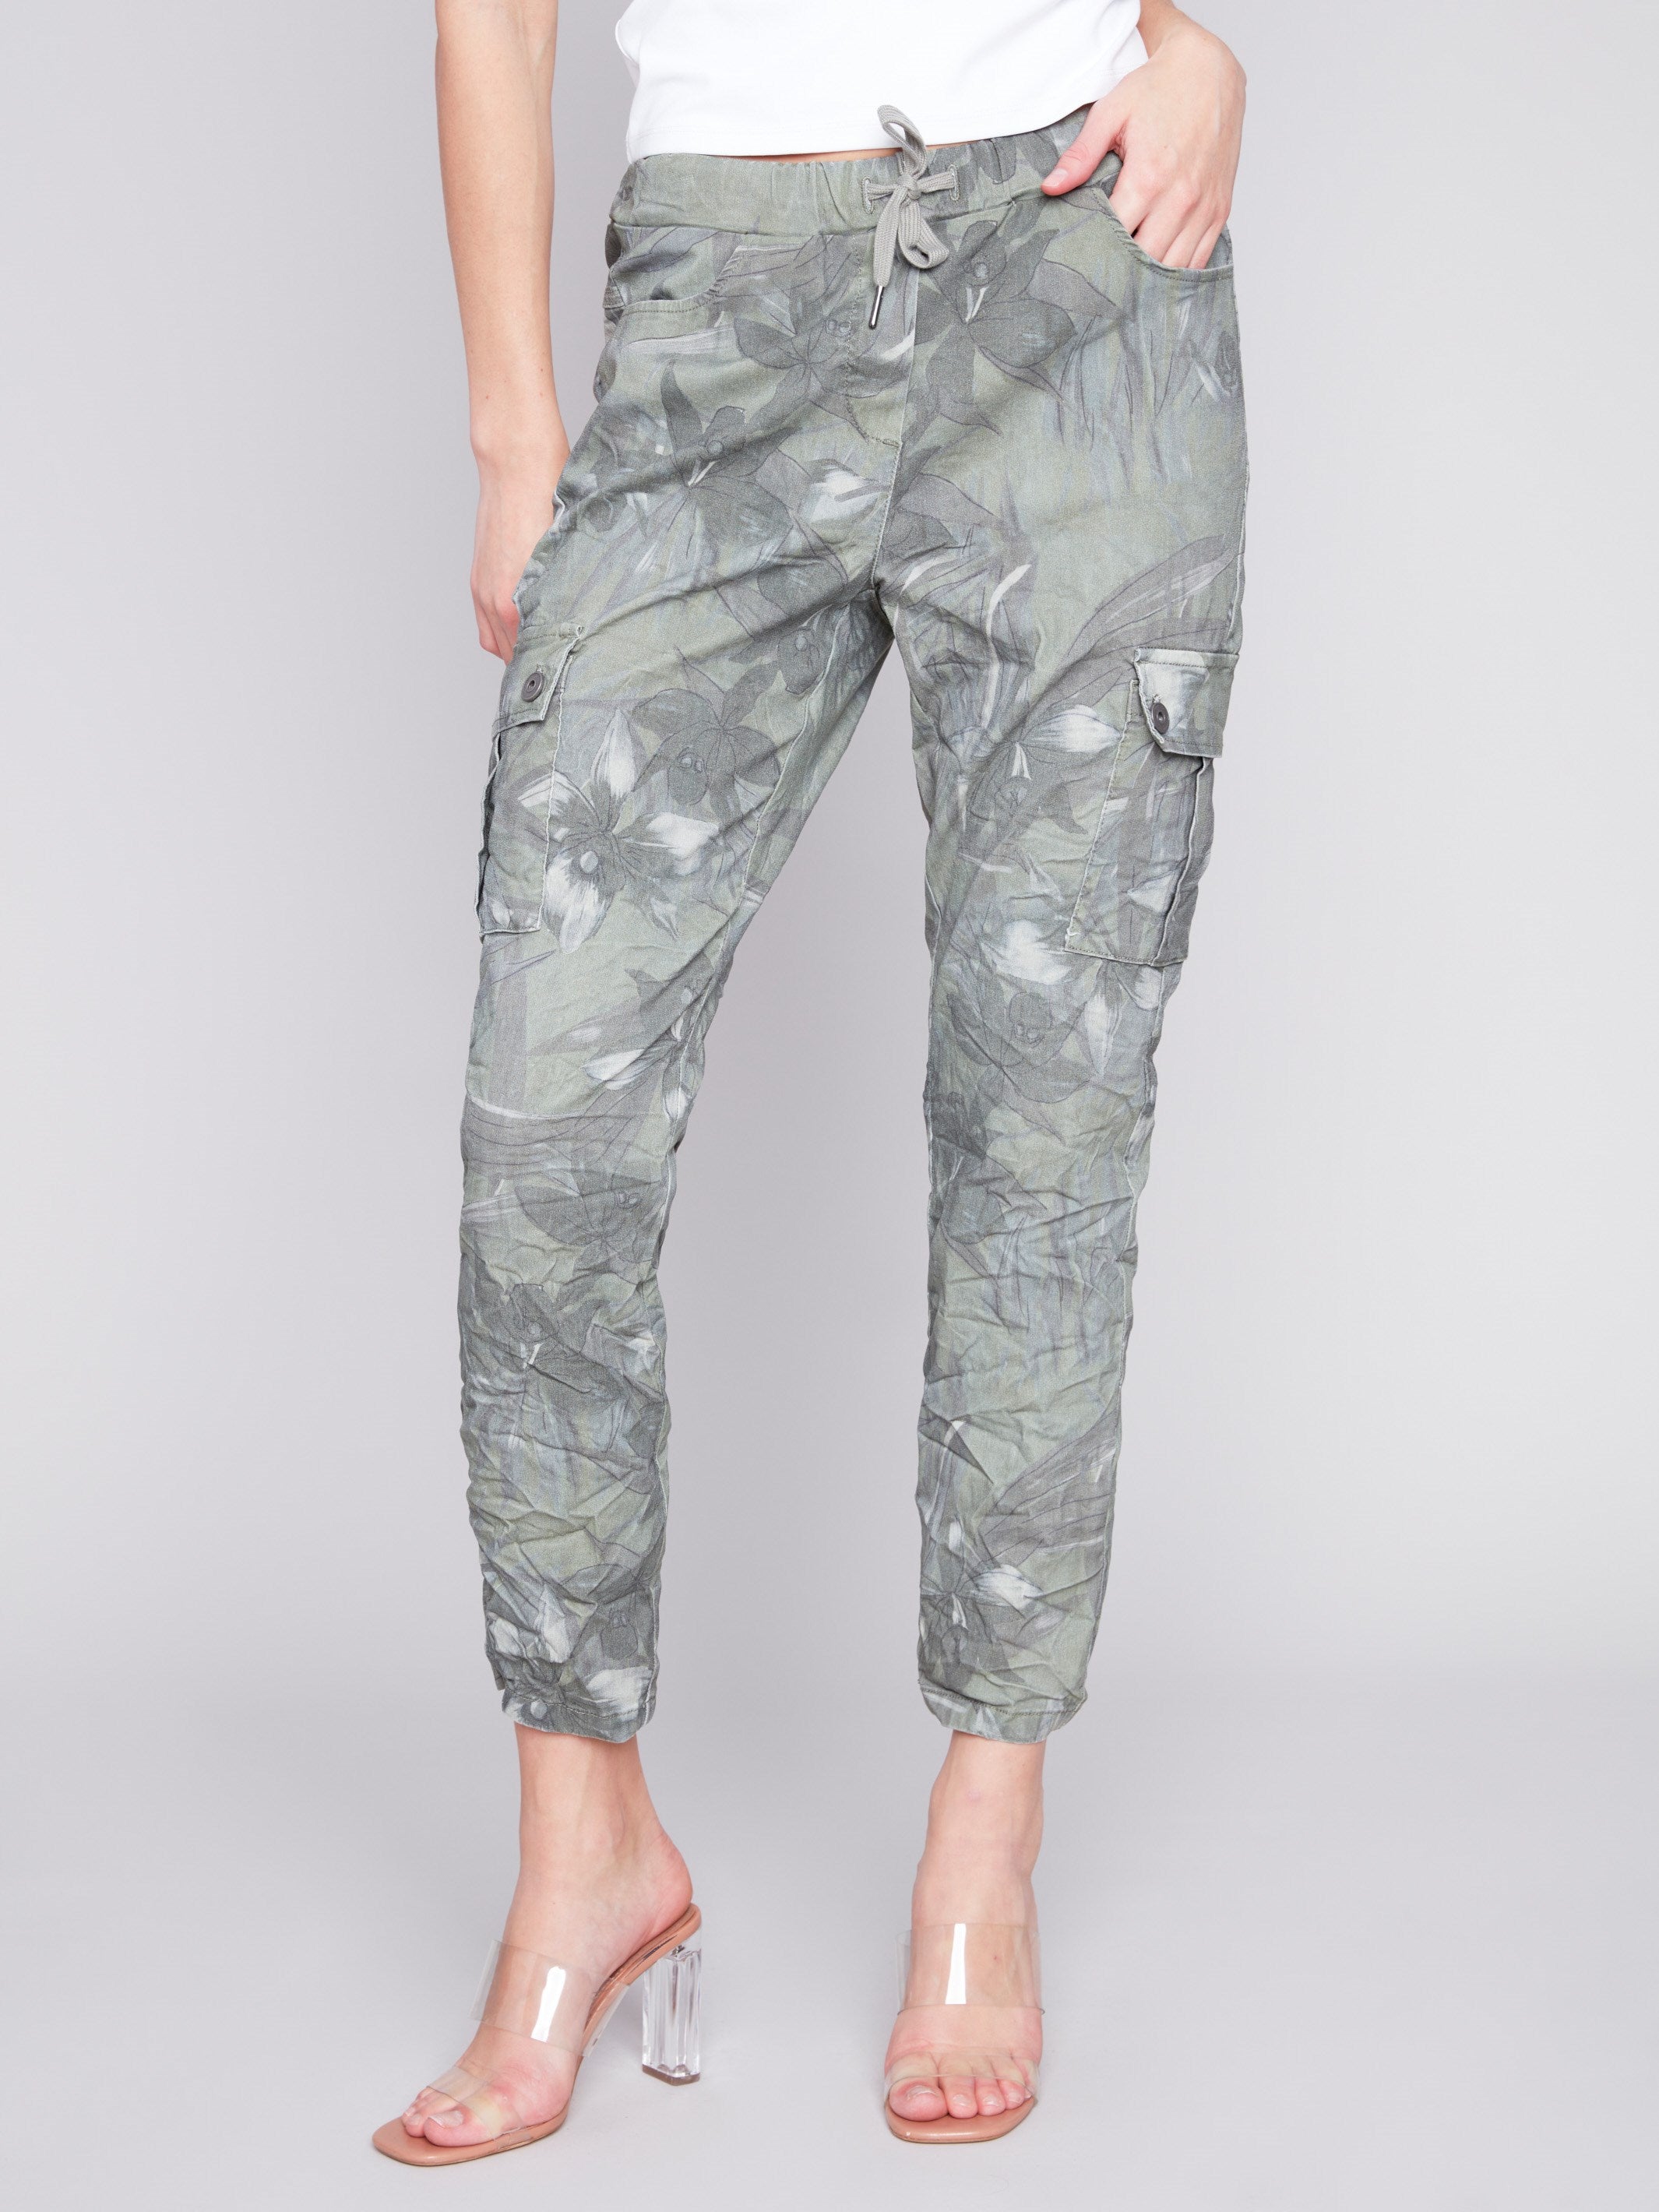 Printed Crinkle Cargo Jogger Pants - Celadon - Charlie B Collection Canada - Image 2